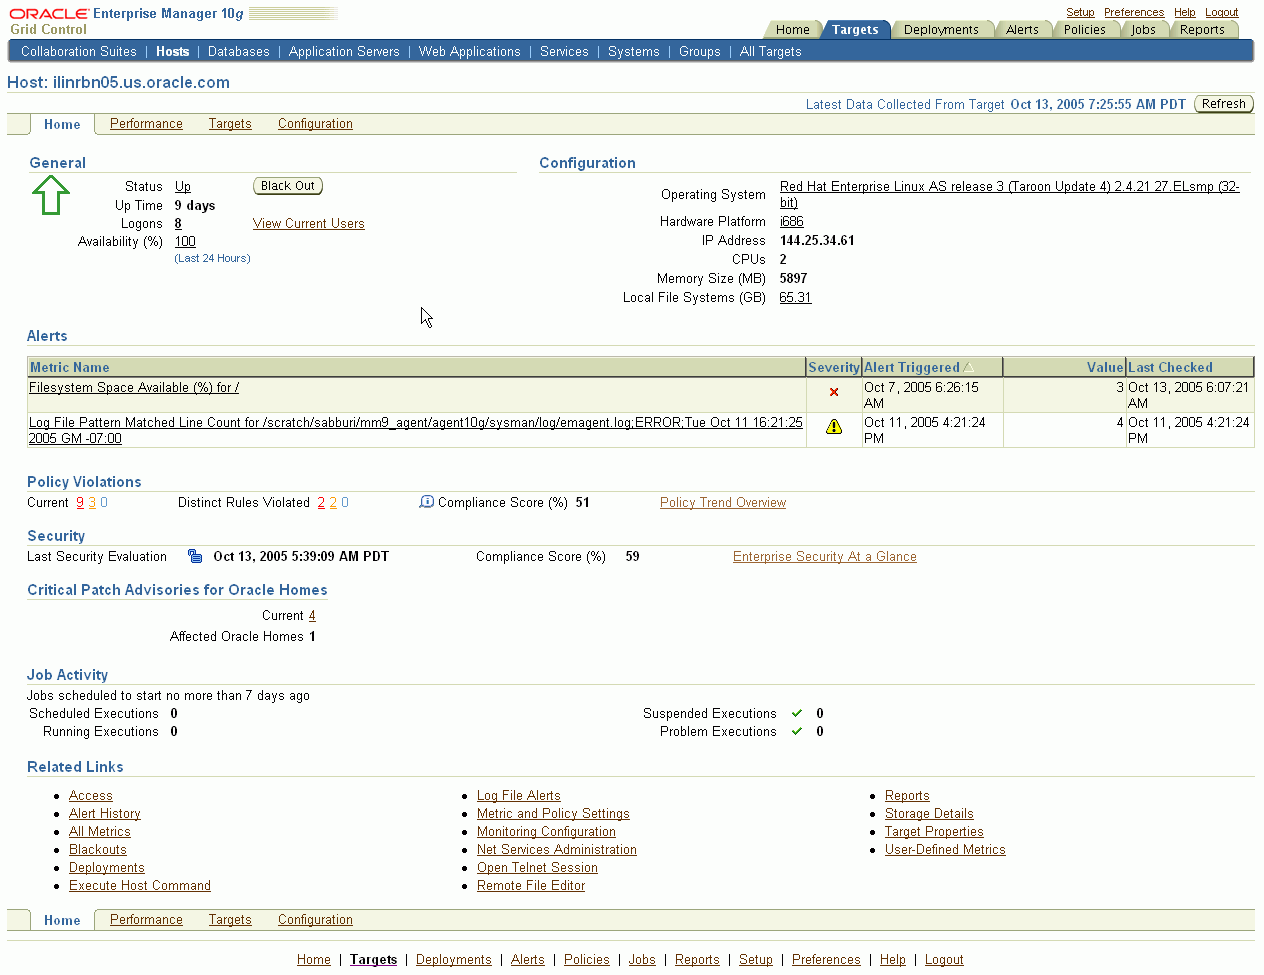 This figure shows a screenshot of the Enterprise Manager Host Home page